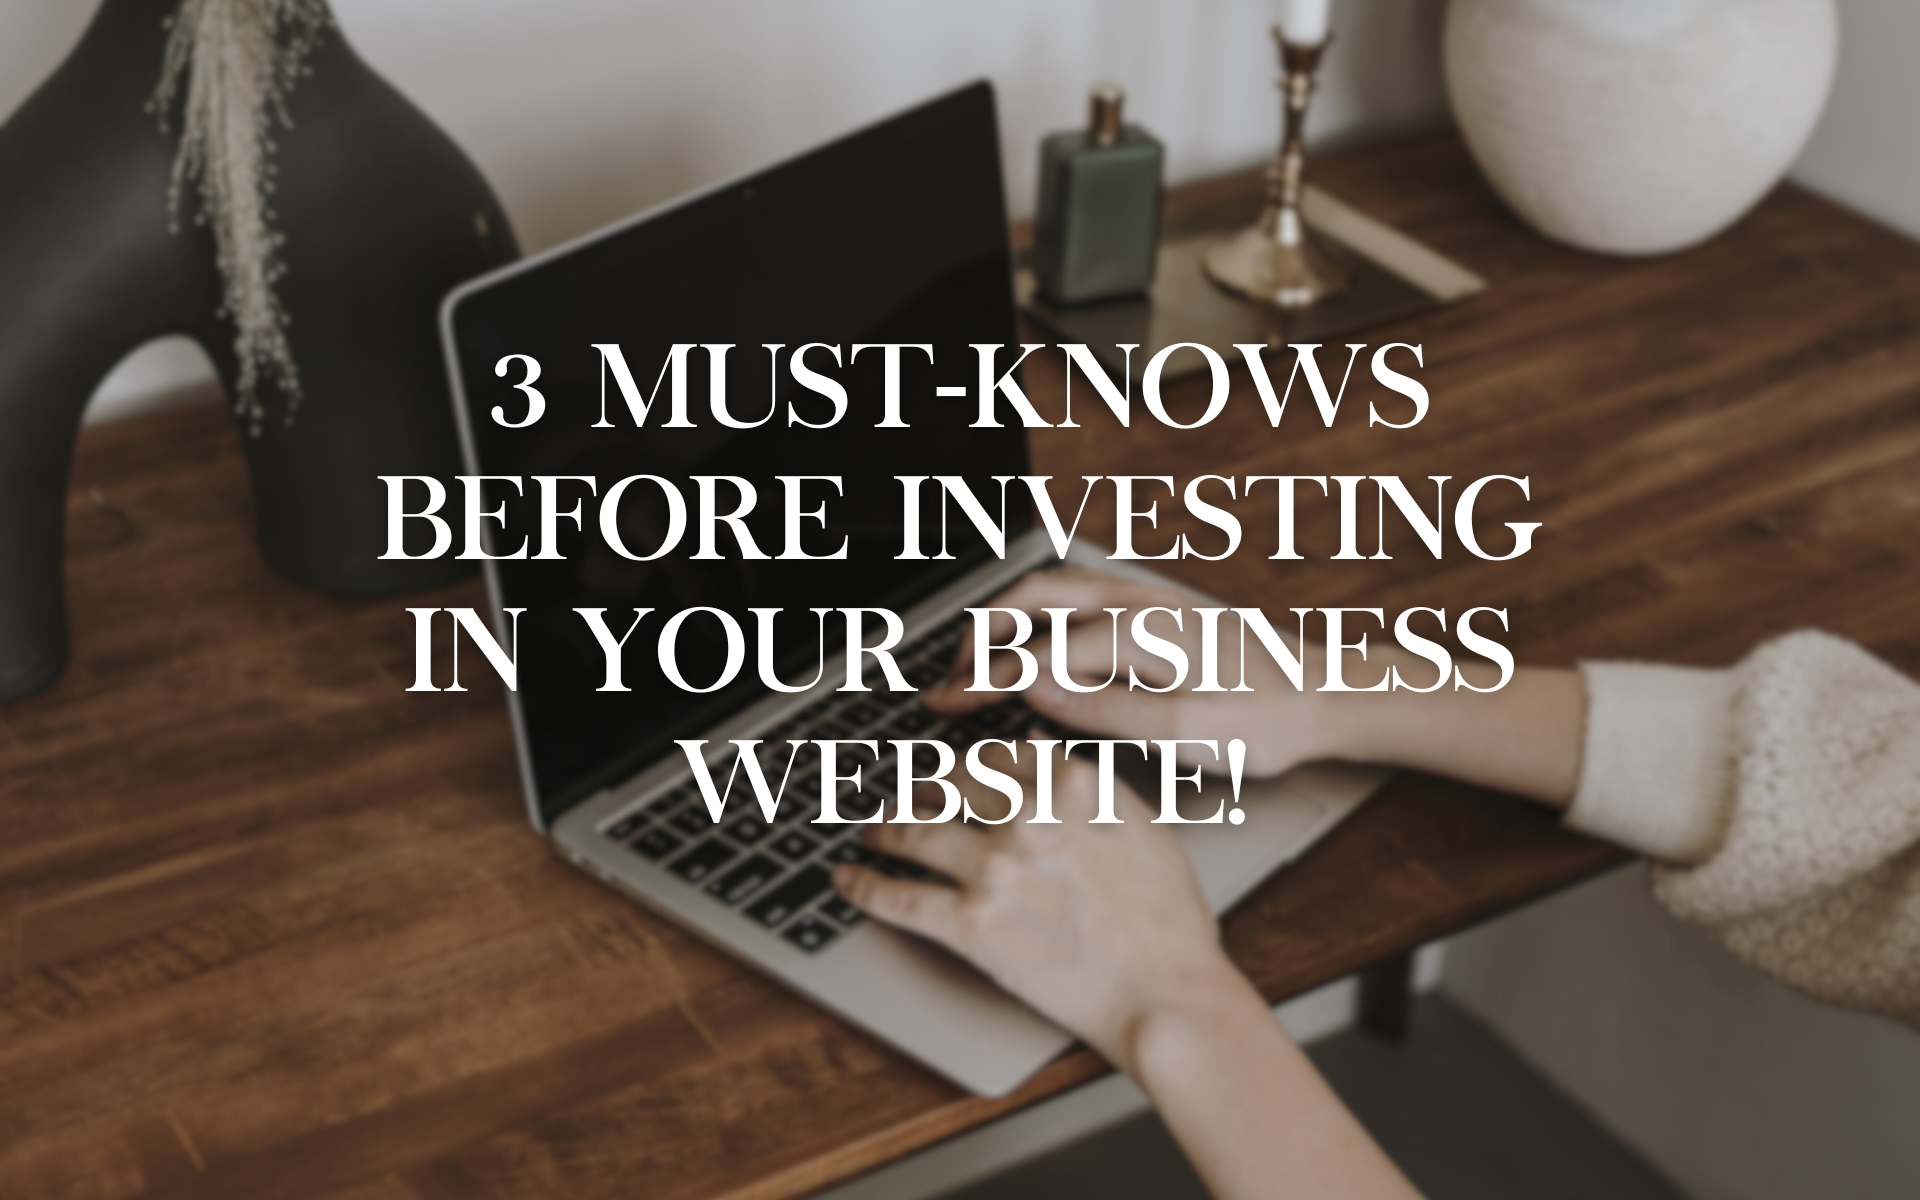 3 Must-Knows Before Investing in Your Business Website!